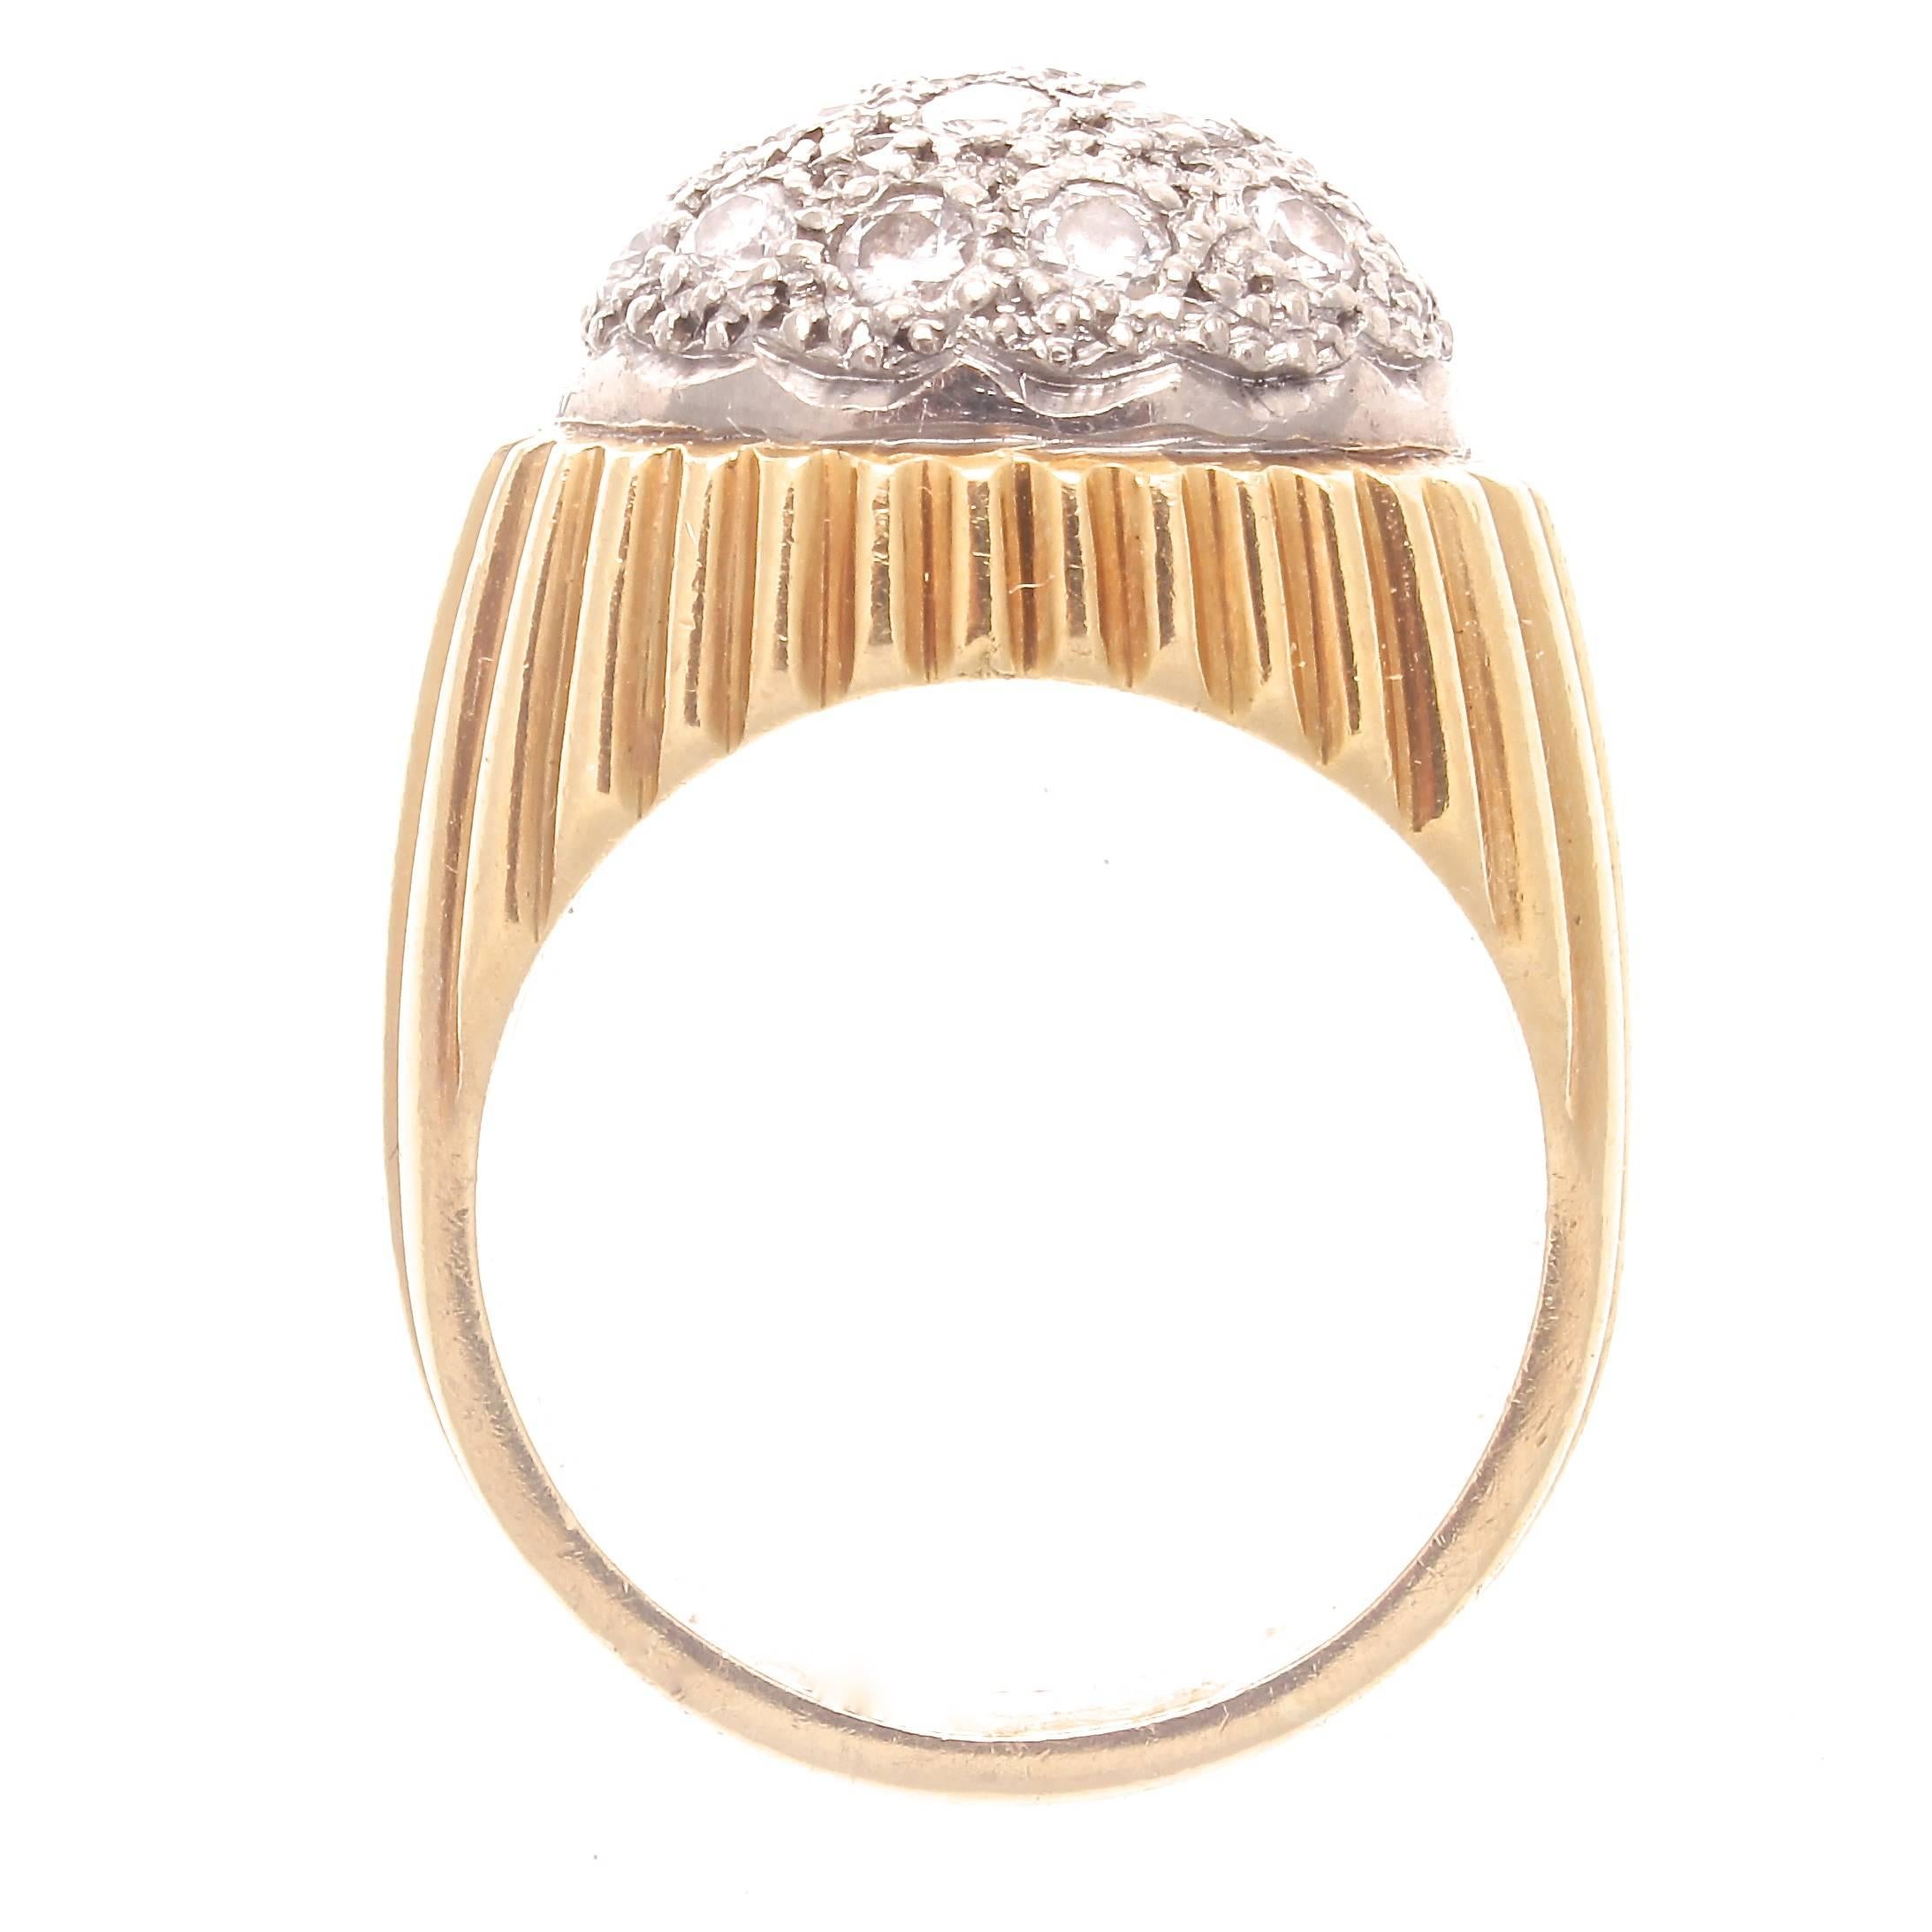 Expression through stylistic design. Featuring a lively dome of diamonds, gracefully set in platinum that is artistically atop streaking lines of 18k yellow gold.

Ring size 4-3/4 and can easily be resized to fit, if needed this would come